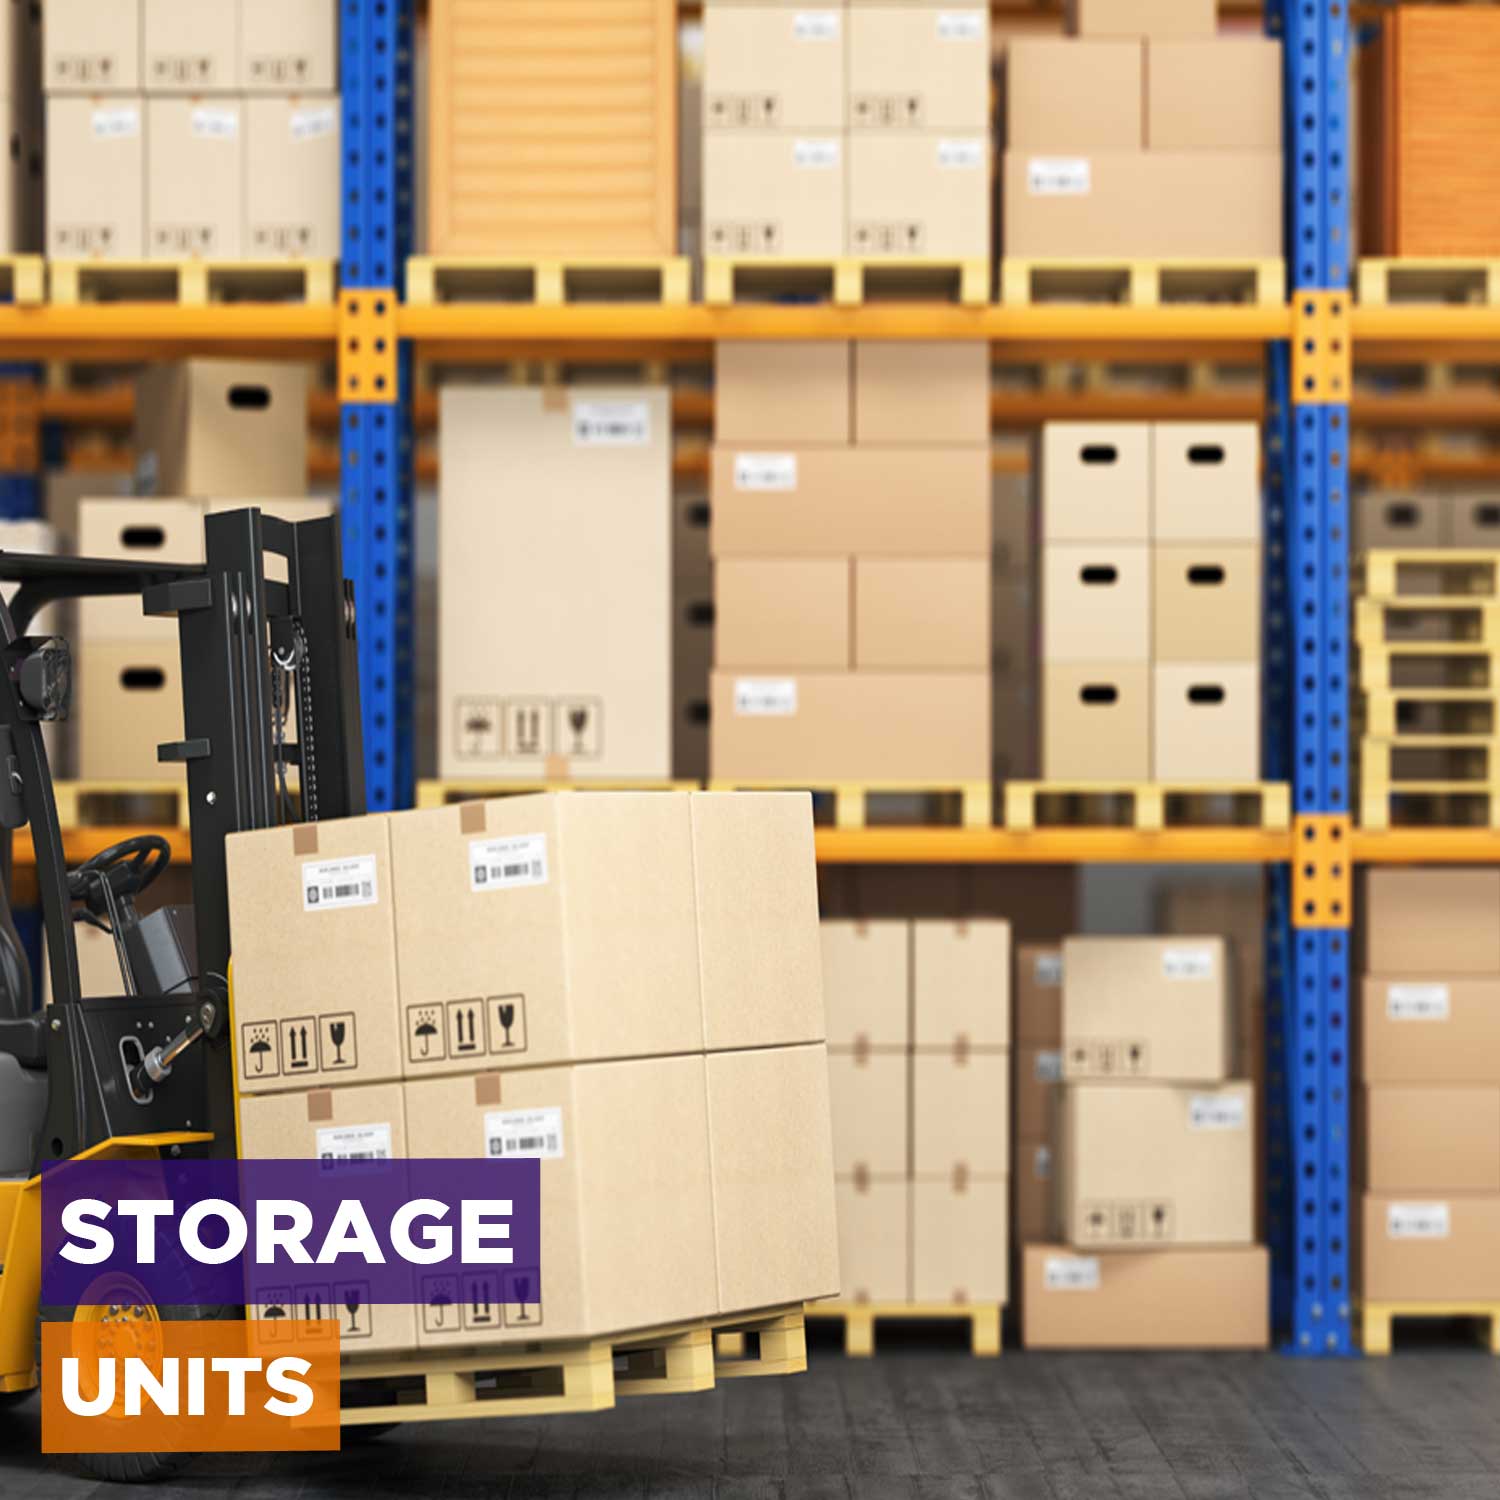 Self Storage Unit | Get a Free Quote for Affordable Self Storage Unit